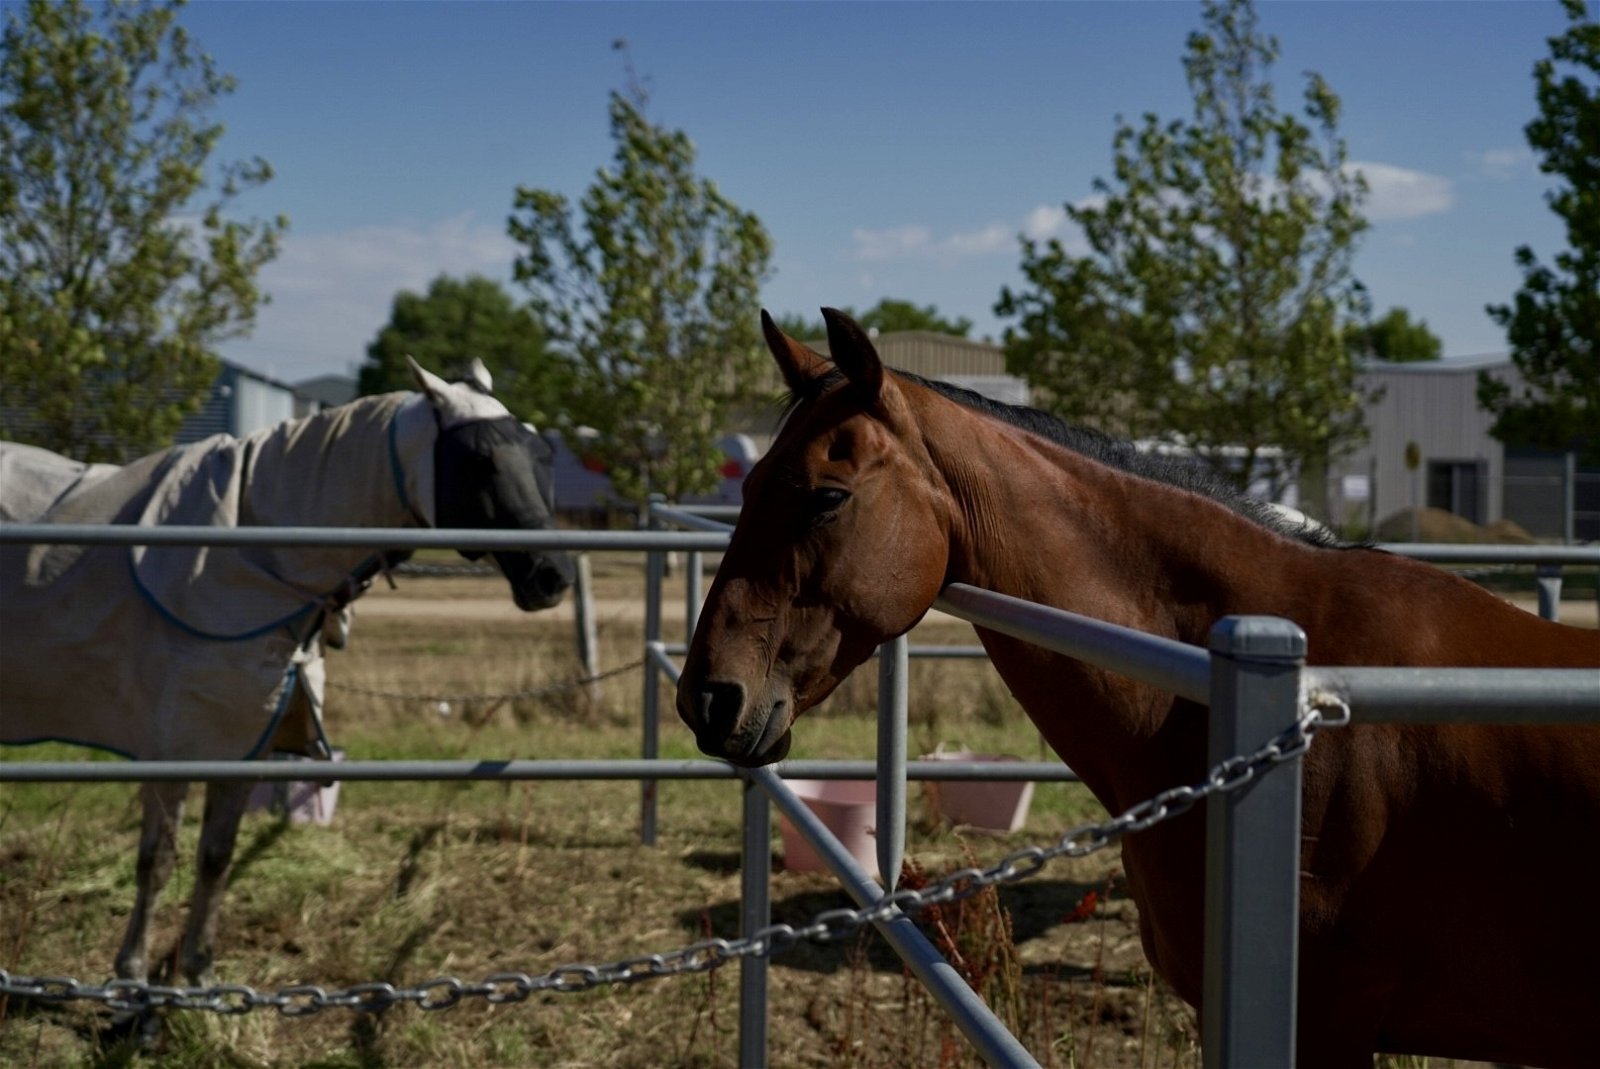 Two horses in a paddock.